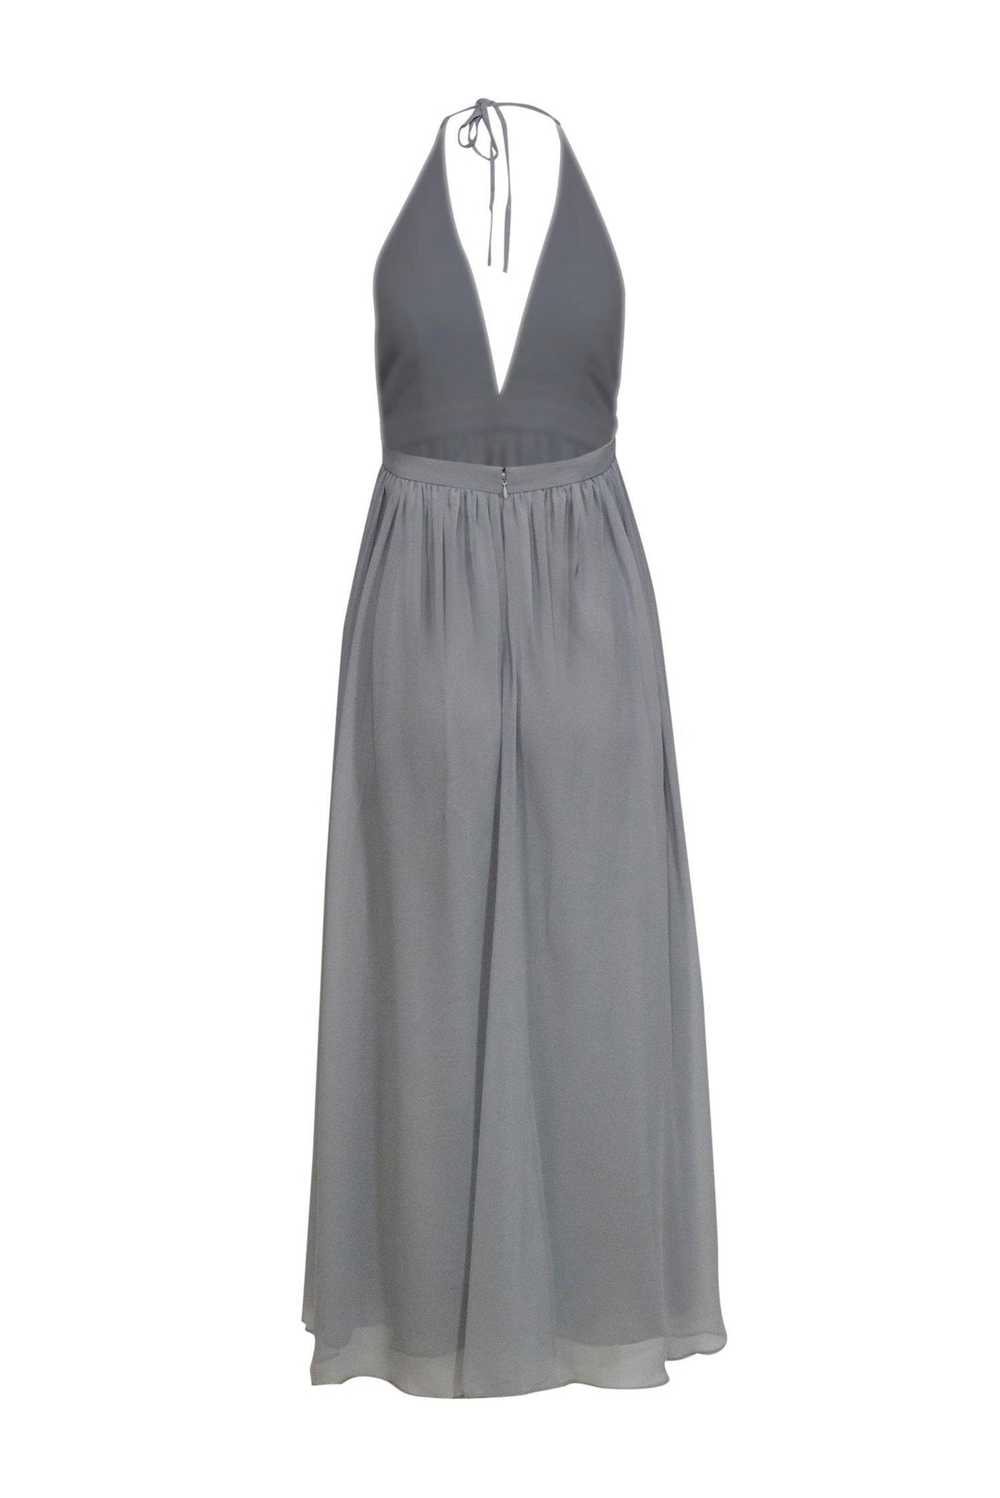 Fame and Partners - Light Grey Halter Gown w/ Mes… - image 3